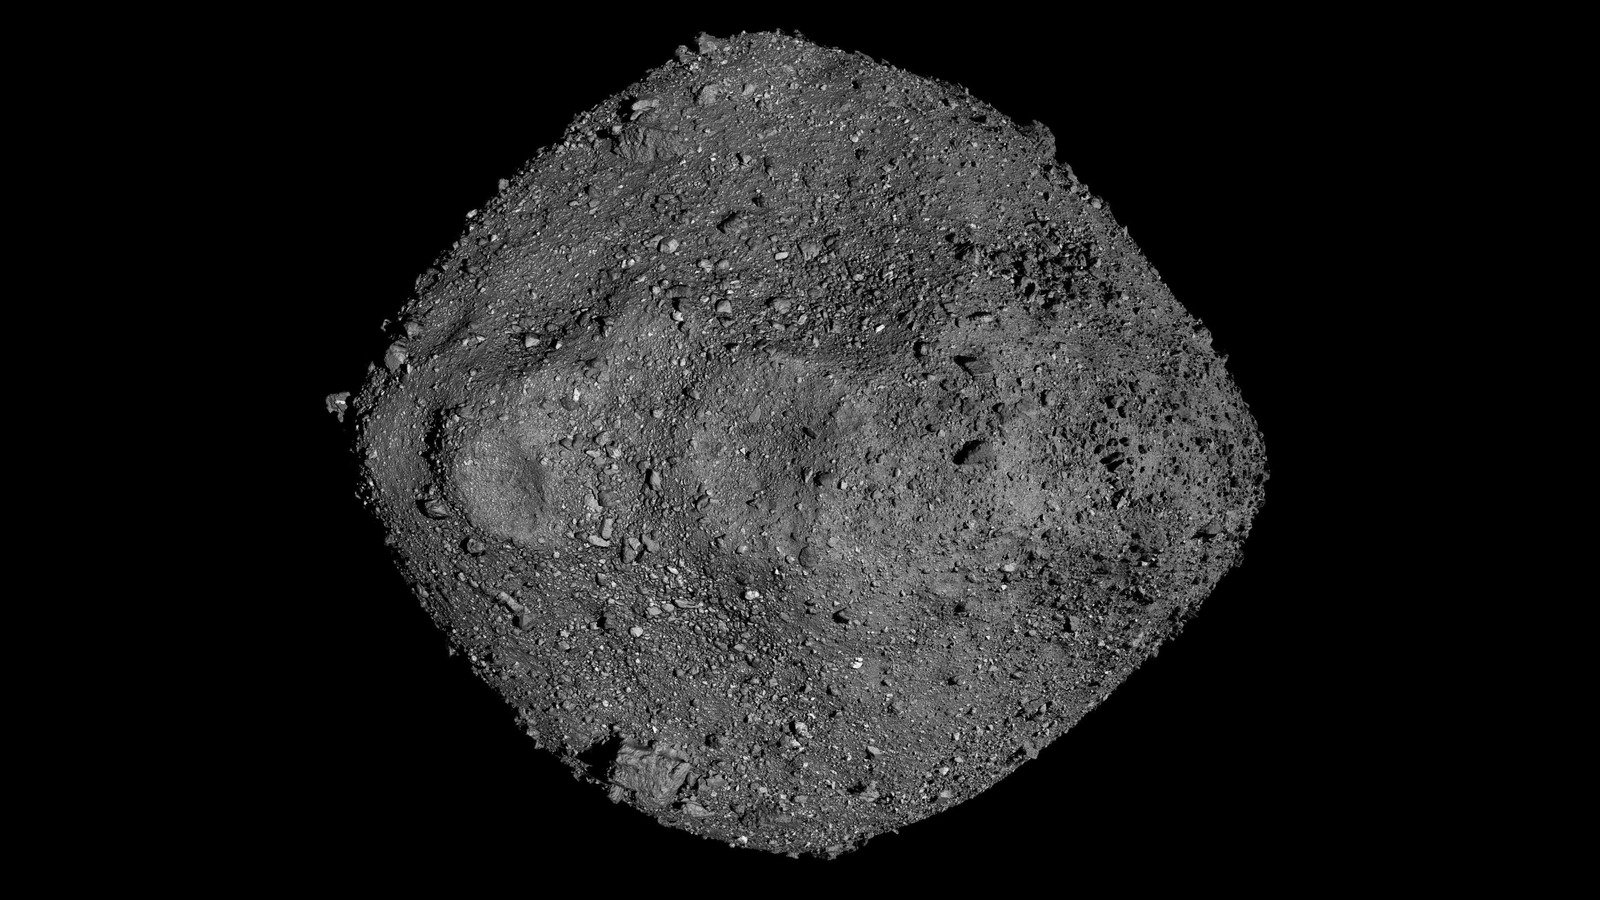 How NASA's Audacious Mission To Sample An Asteroid Almost Ended In Bizarre Disaster